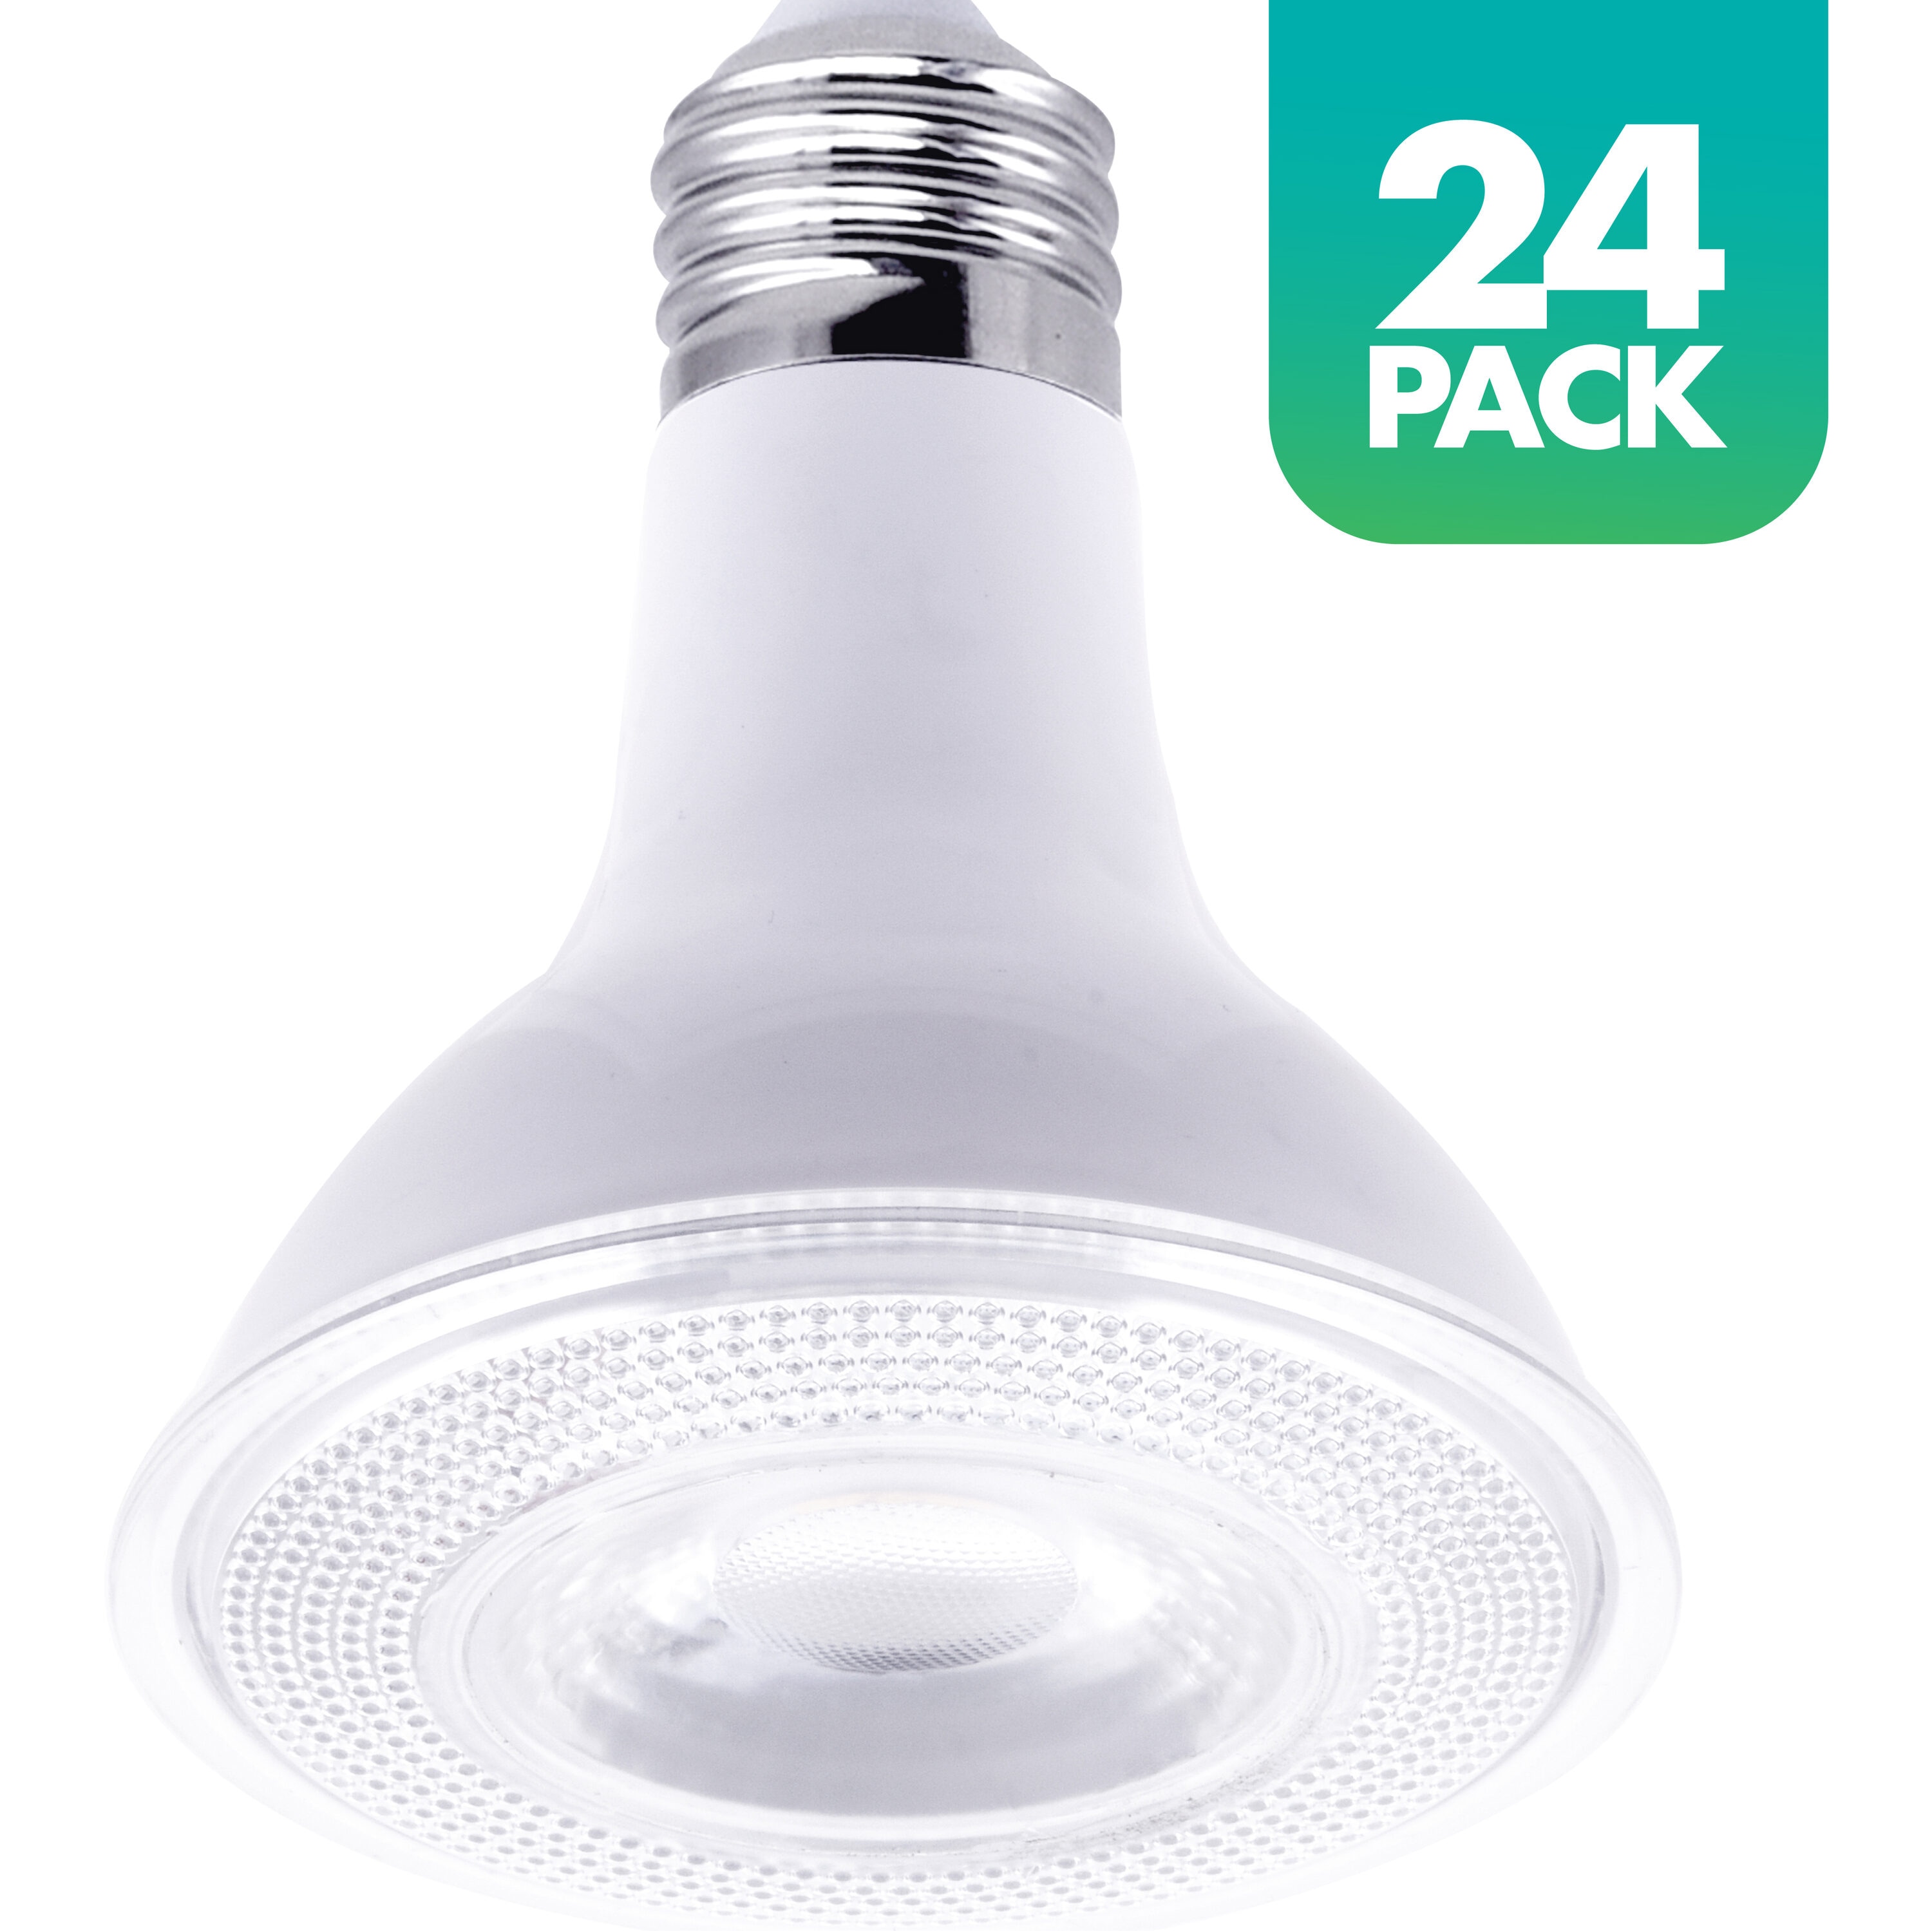 for-indoor-outdoor-use-energy-star-light-bulbs-at-lowes